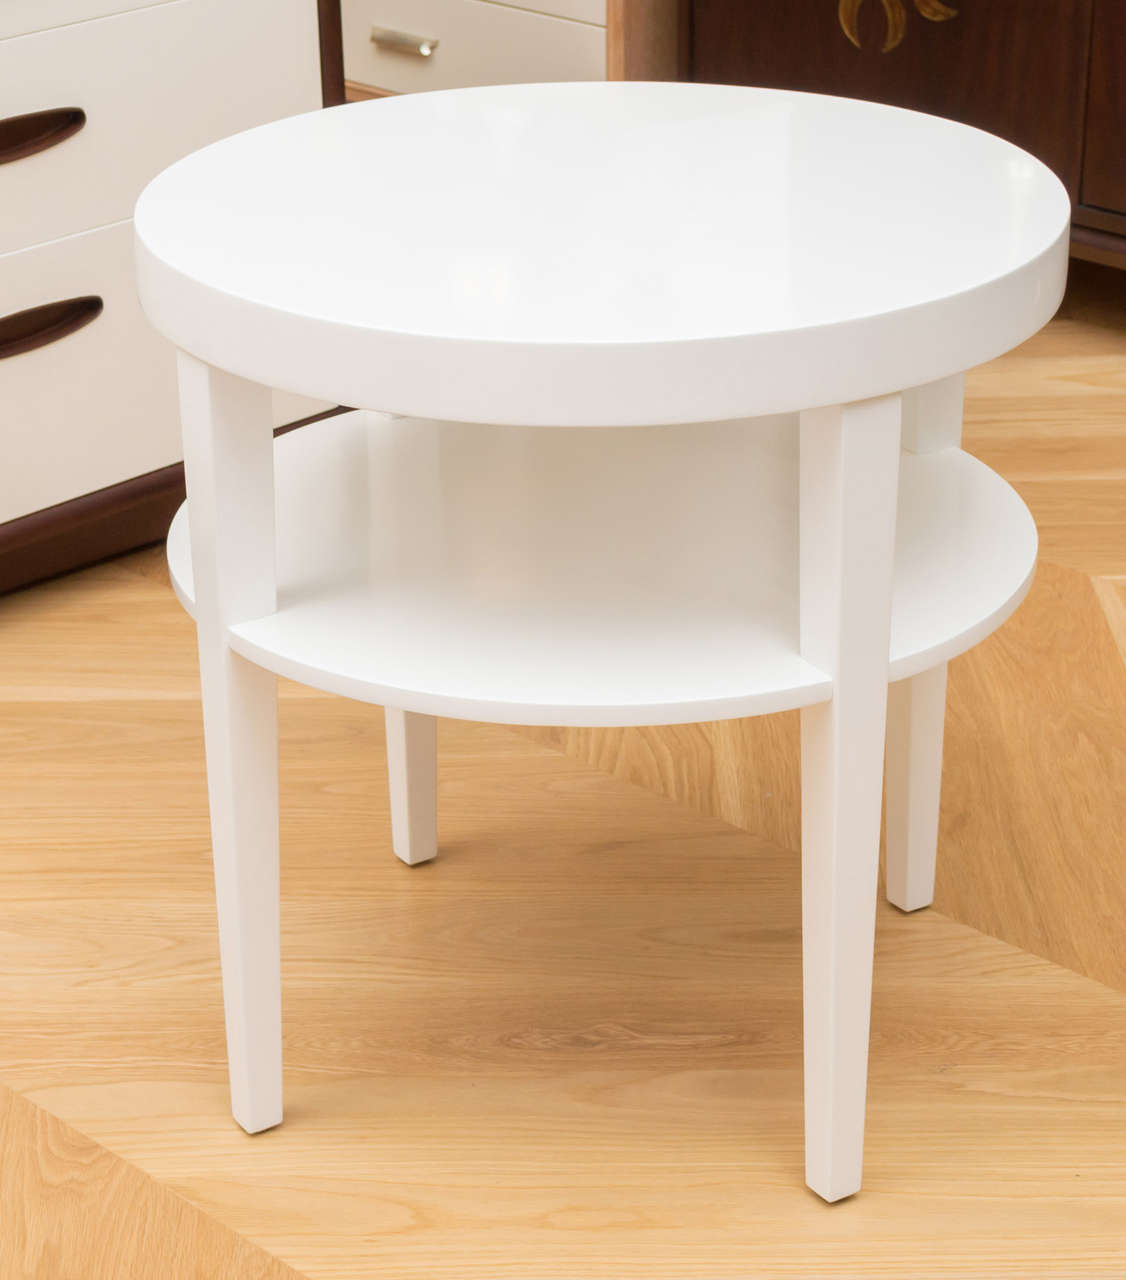 Perfect,  white lacquered Widdicomb side table.